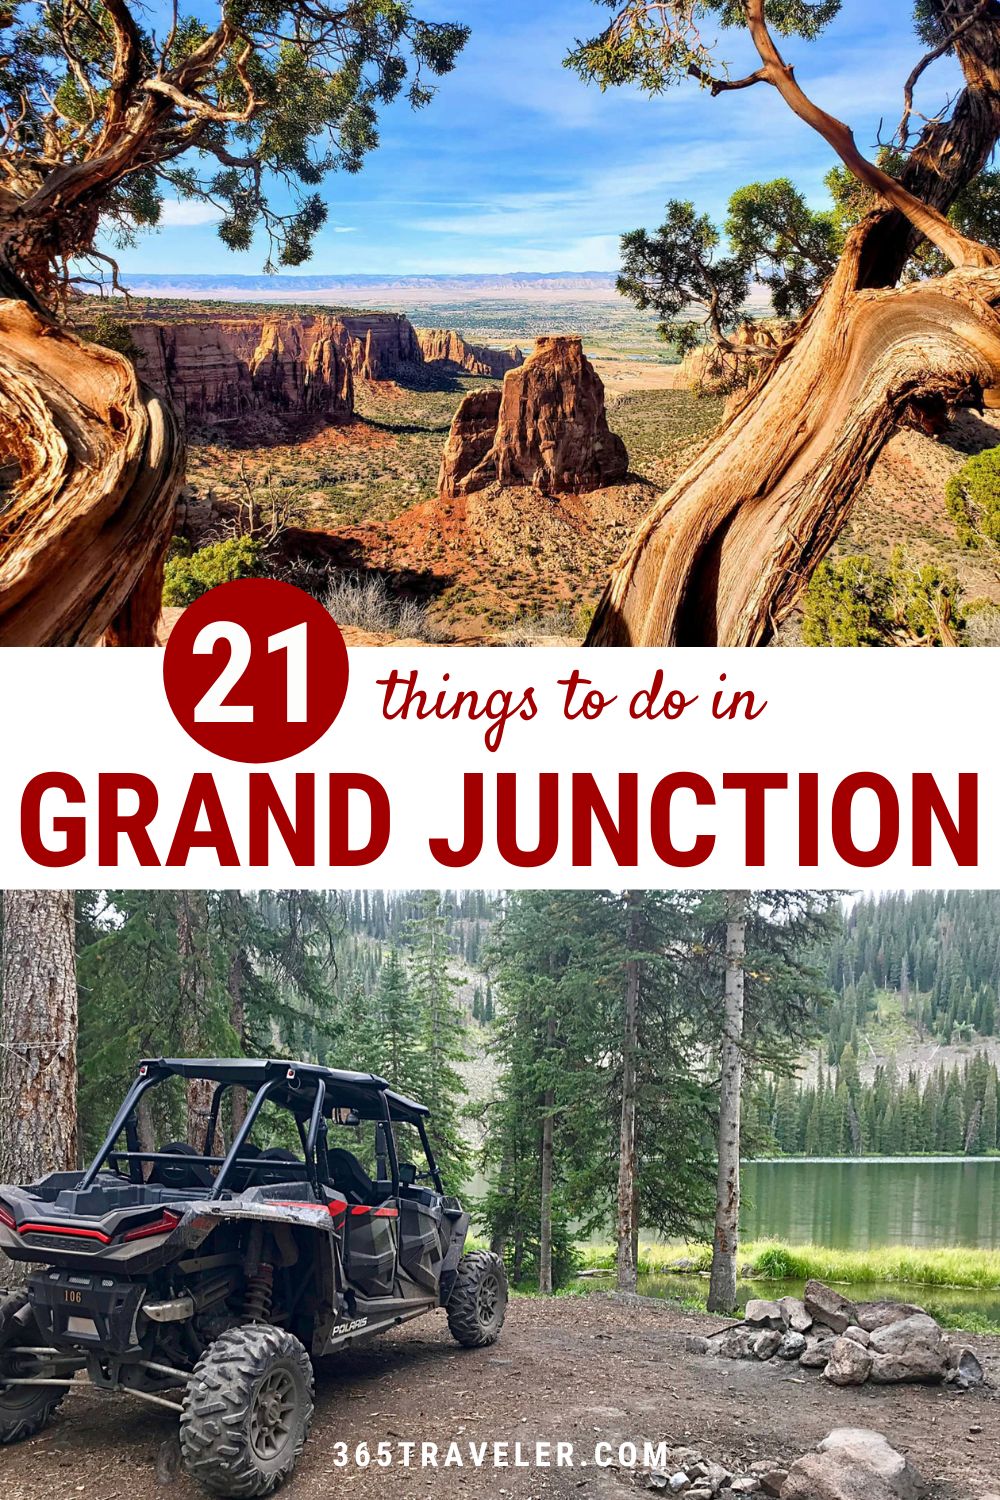 21 ABSOLUTE BEST THINGS TO DO IN GRAND JUNCTION